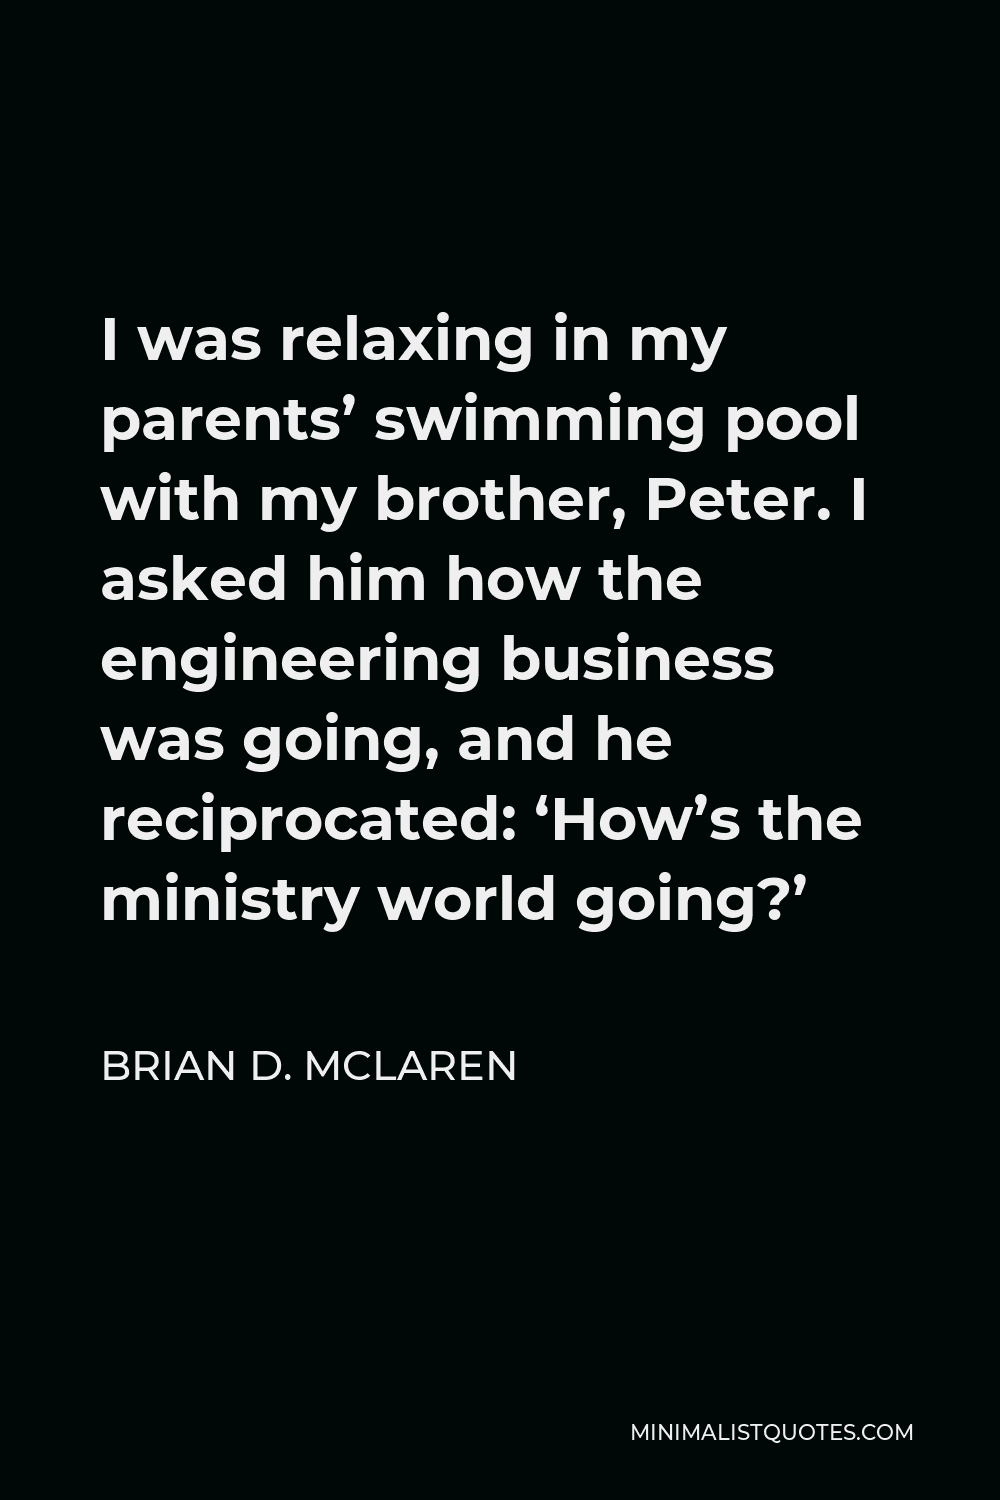 Brian D. McLaren Quote - I was relaxing in my parents’ swimming pool with my brother, Peter. I asked him how the engineering business was going, and he reciprocated: ‘How’s the ministry world going?’